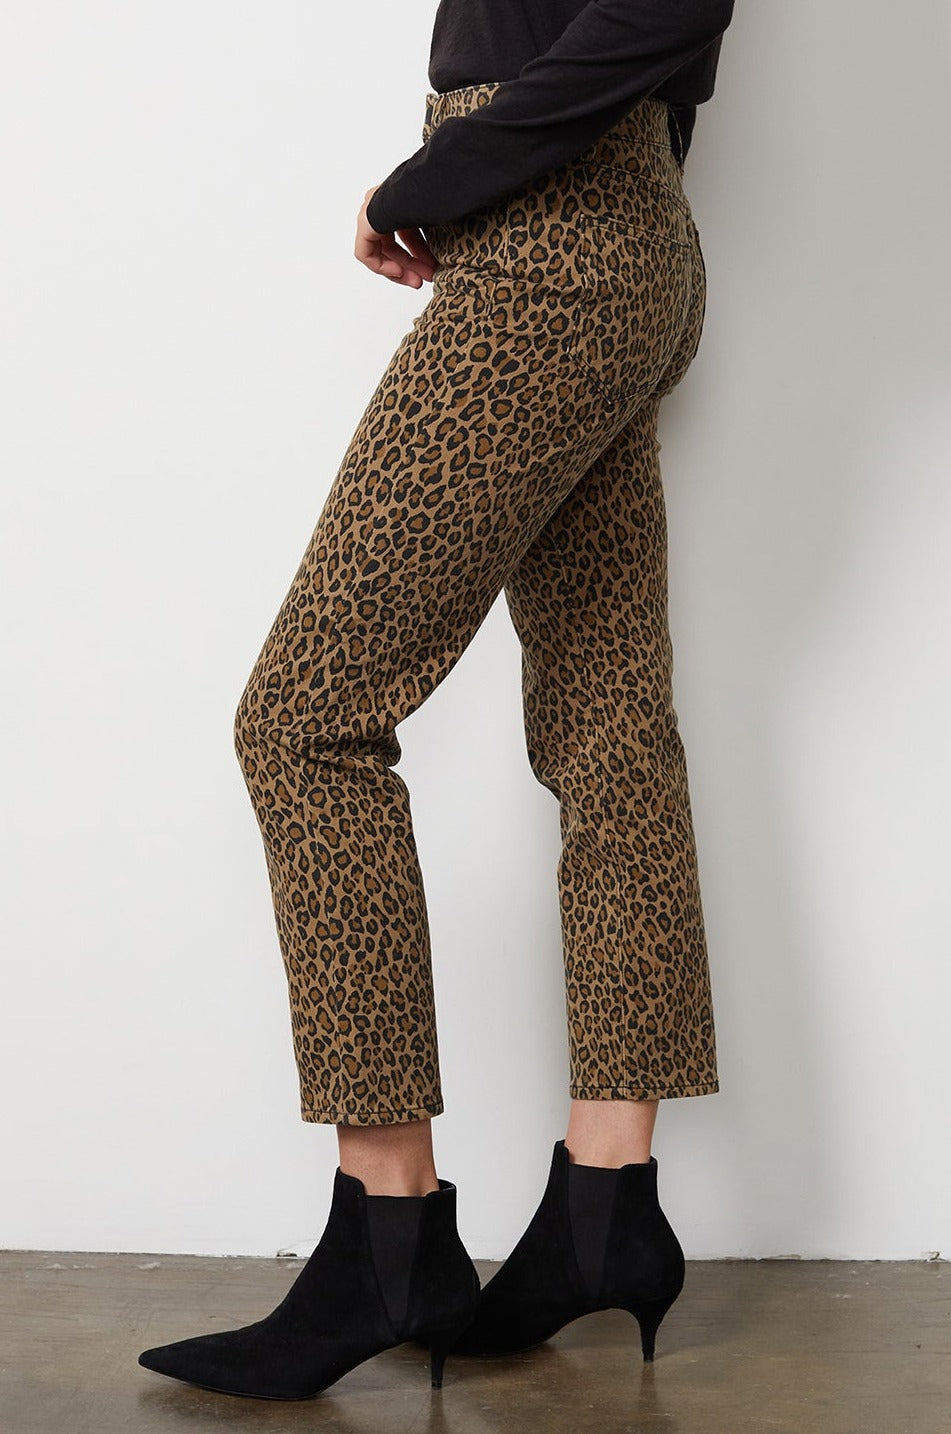 A woman wearing Velvet by Graham & Spencer leopard print pants and winter boots.-16675719217345